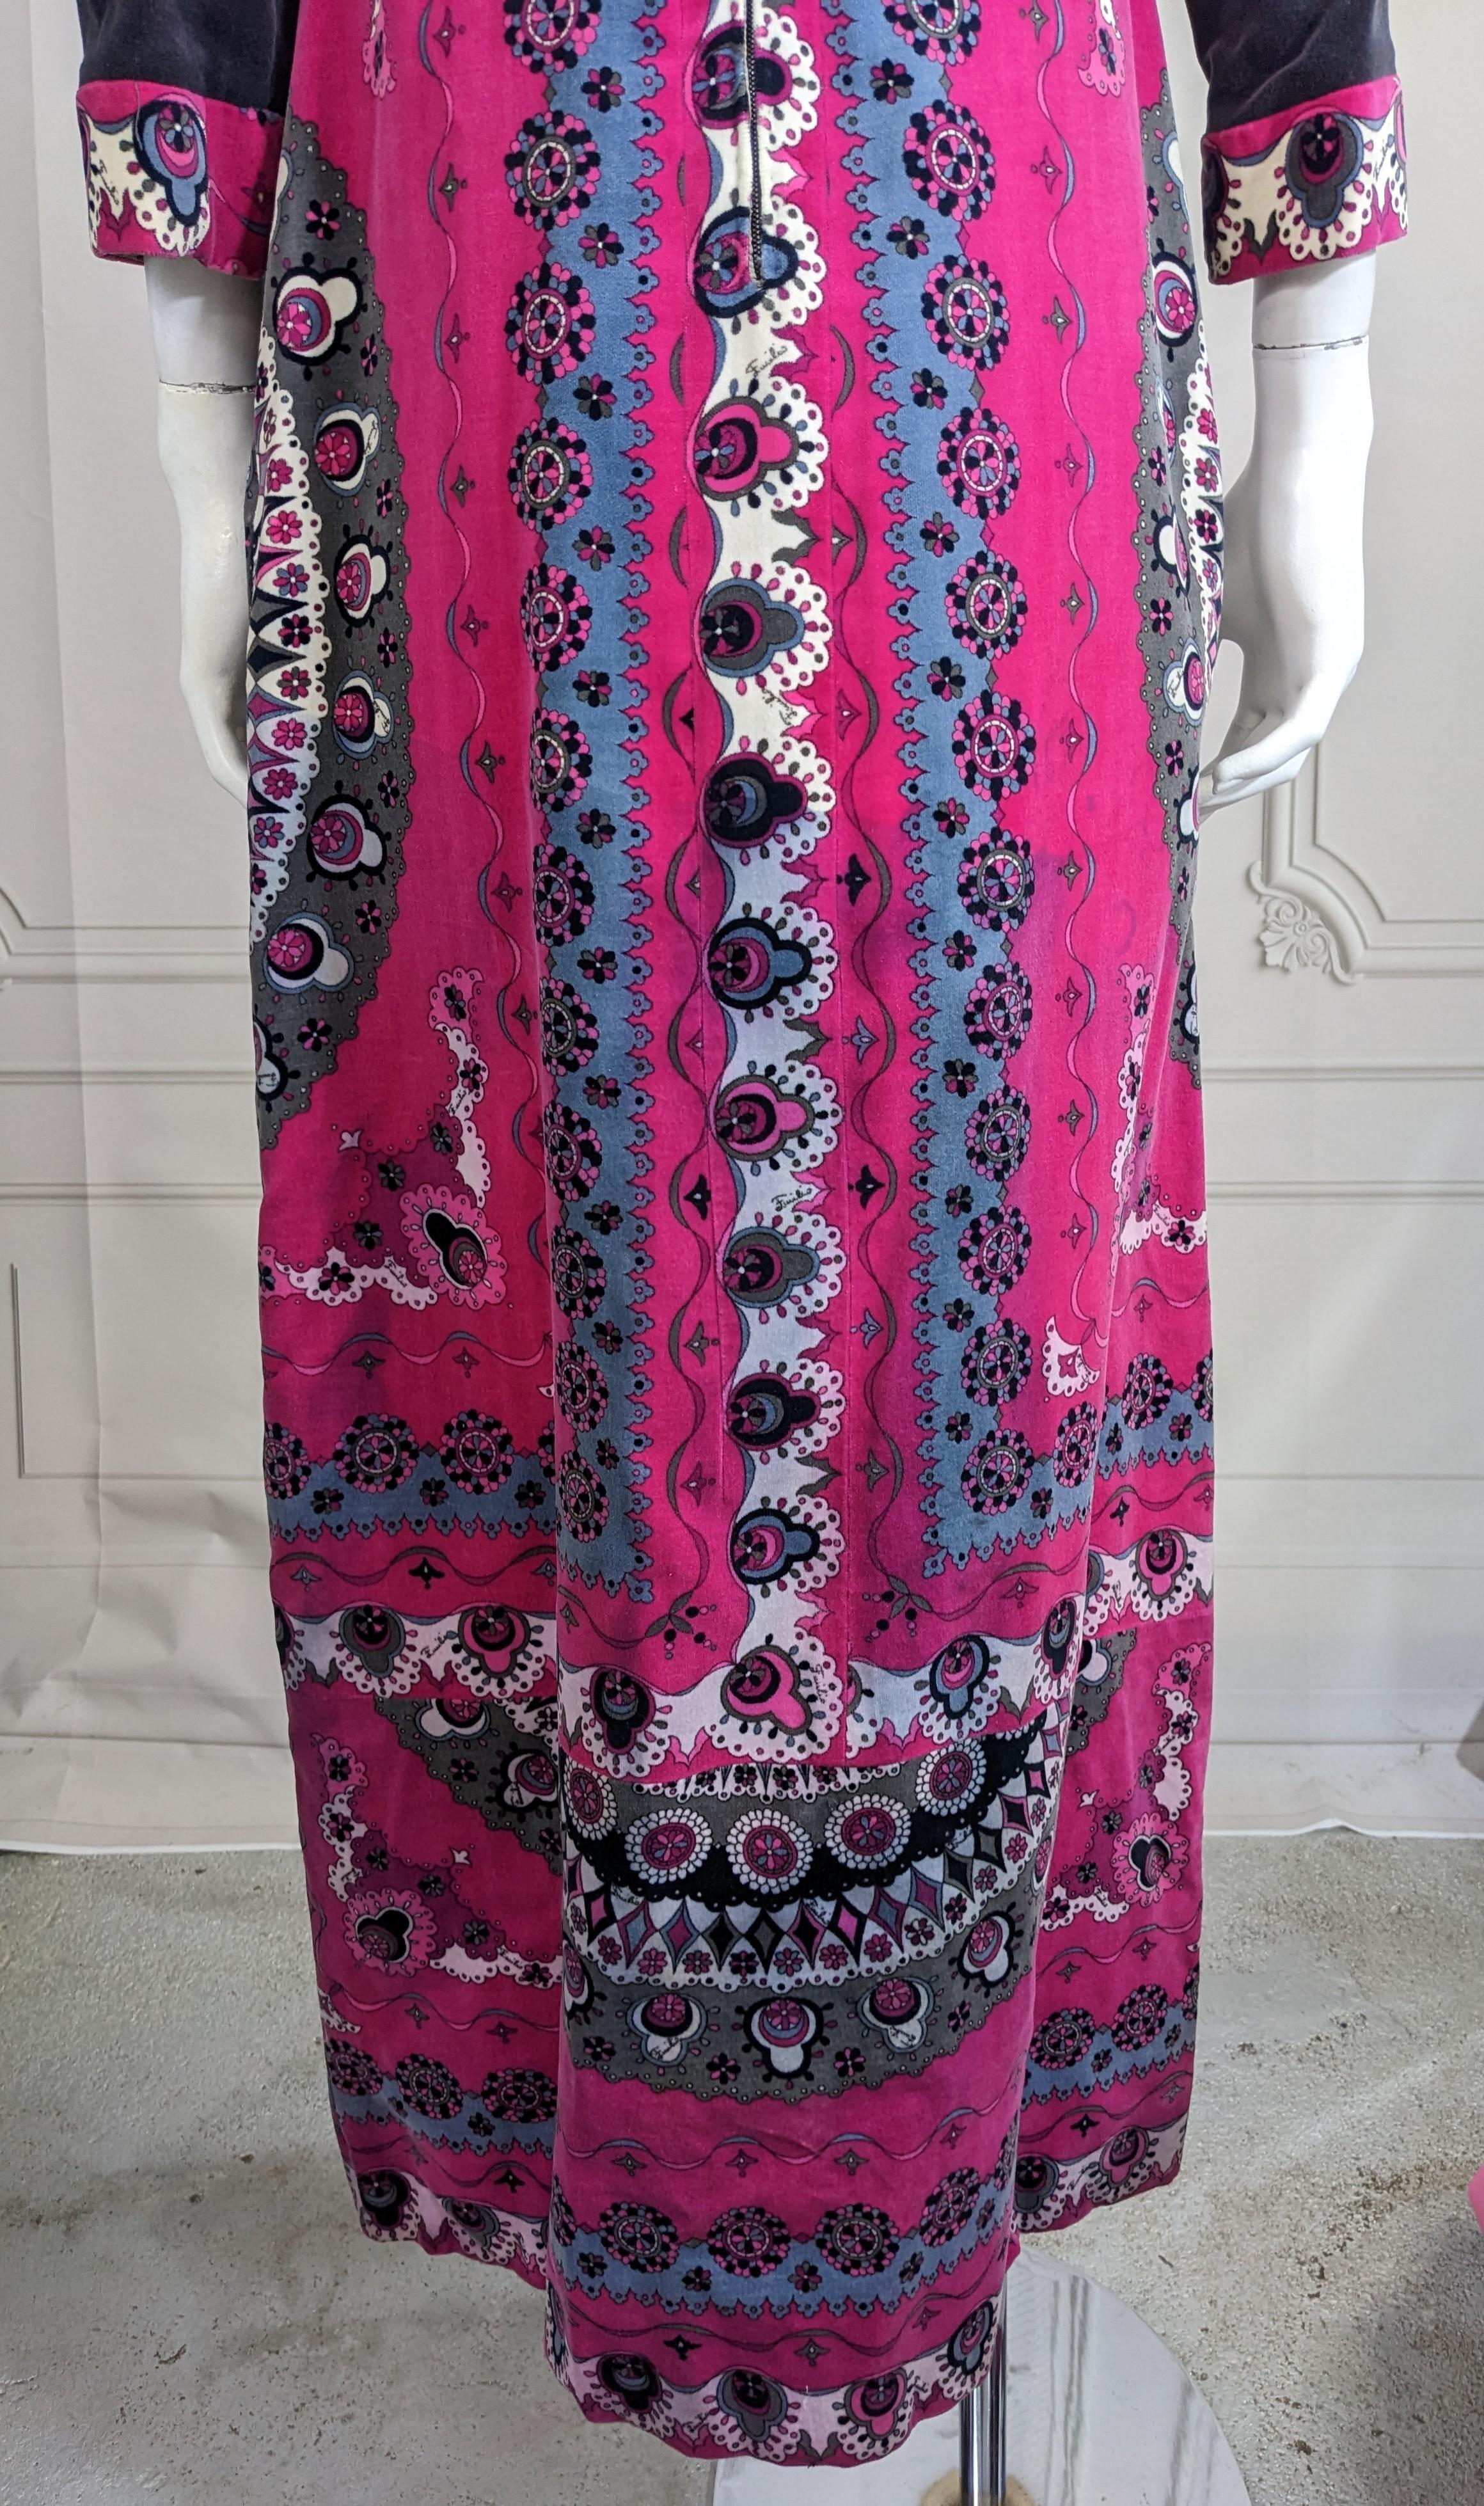 Emilio Pucci Graphic Velvet Gown with Choker For Sale 3